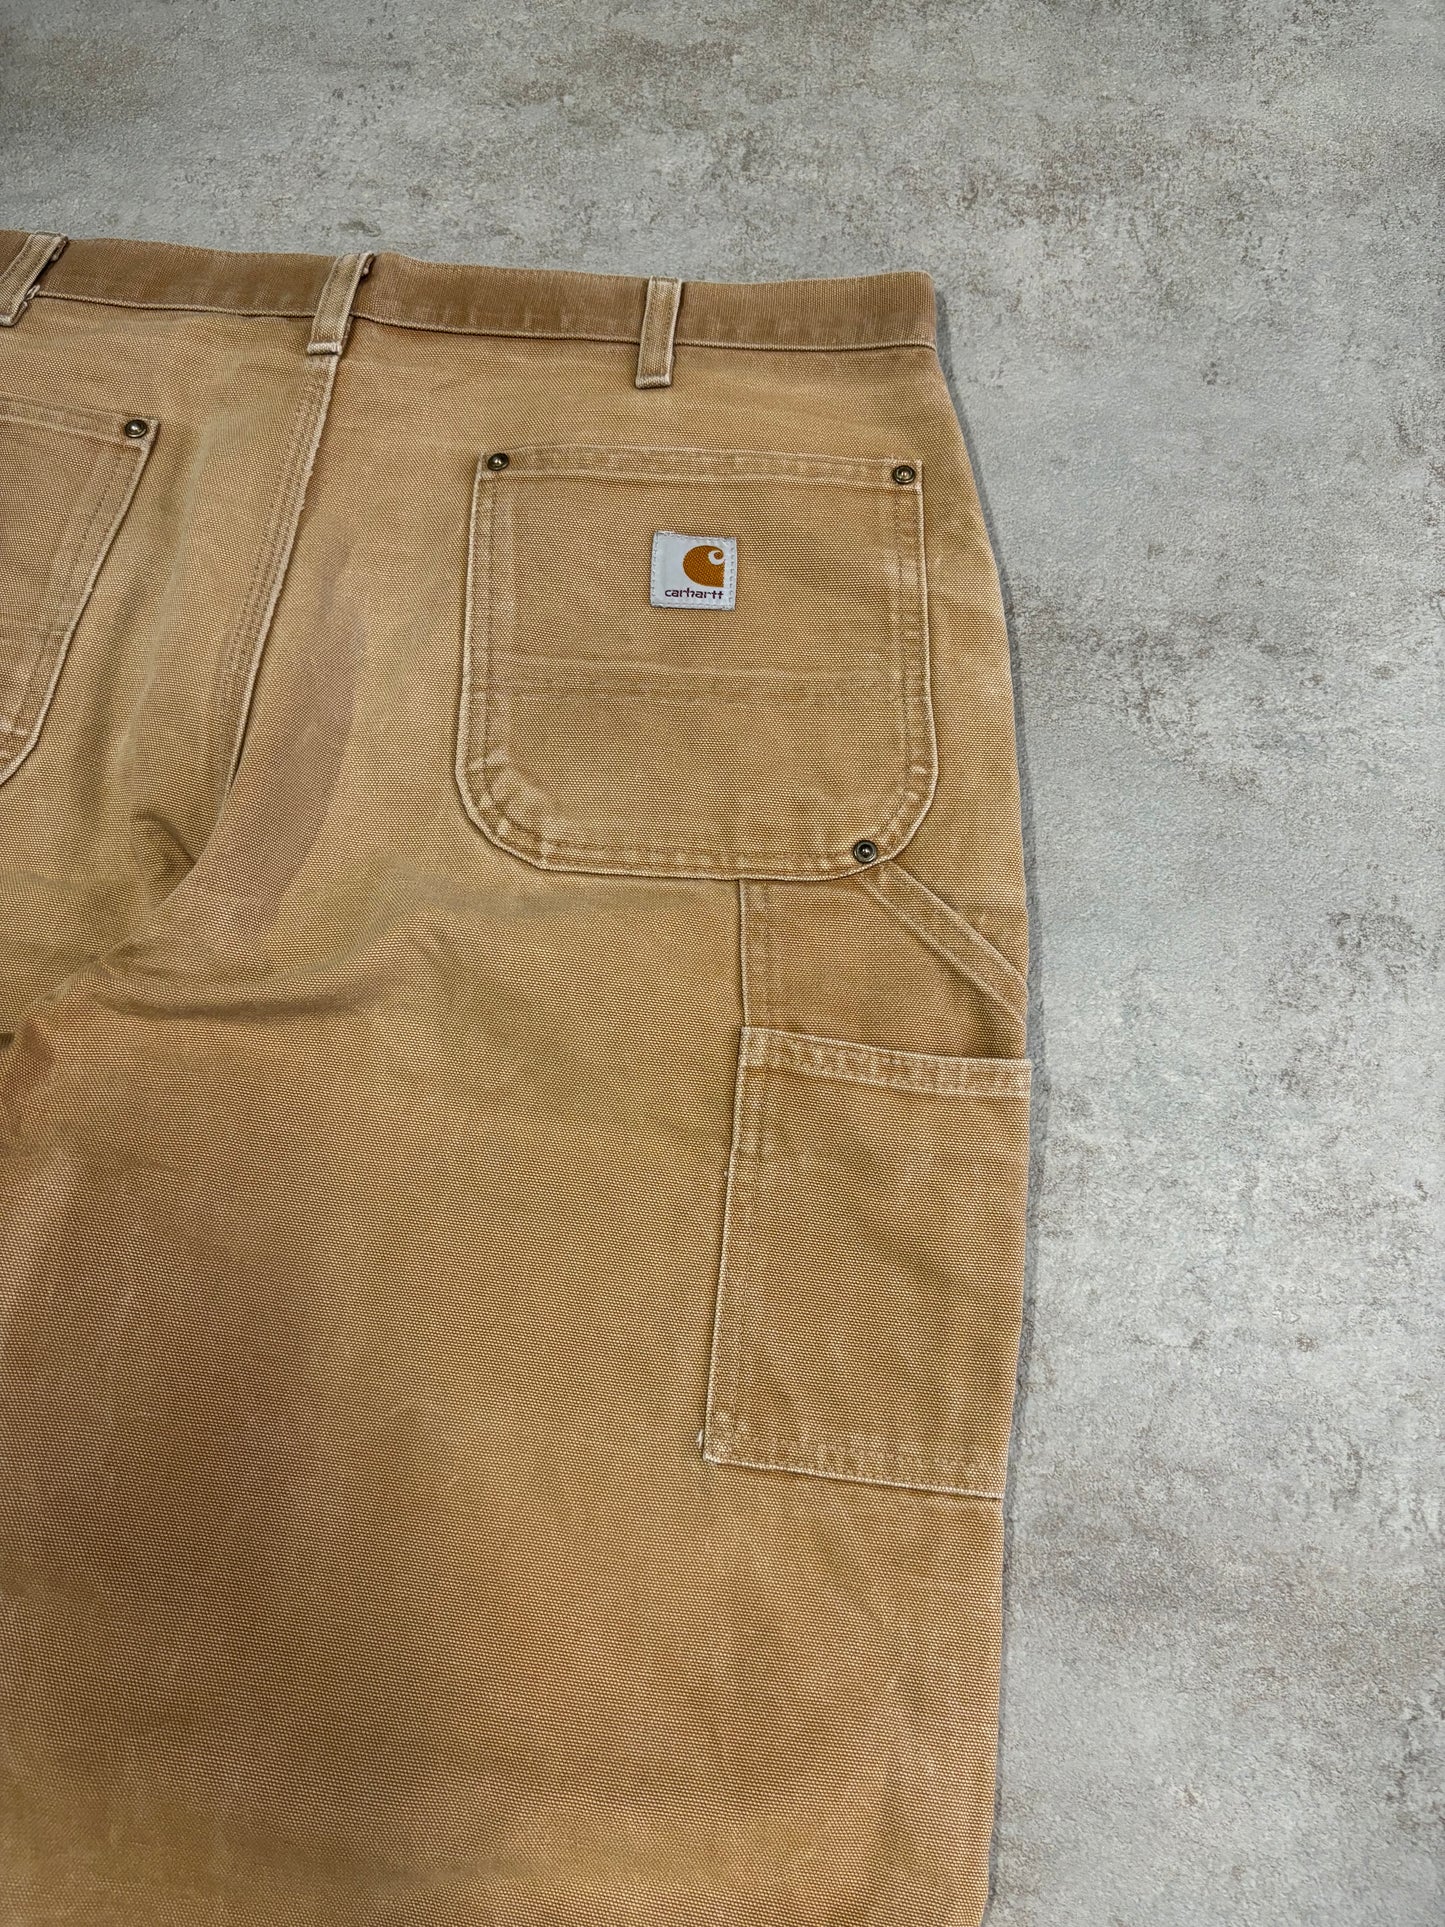 Carhartt 'Double Knee' 90s Vintage 'Stained' Pants - XL